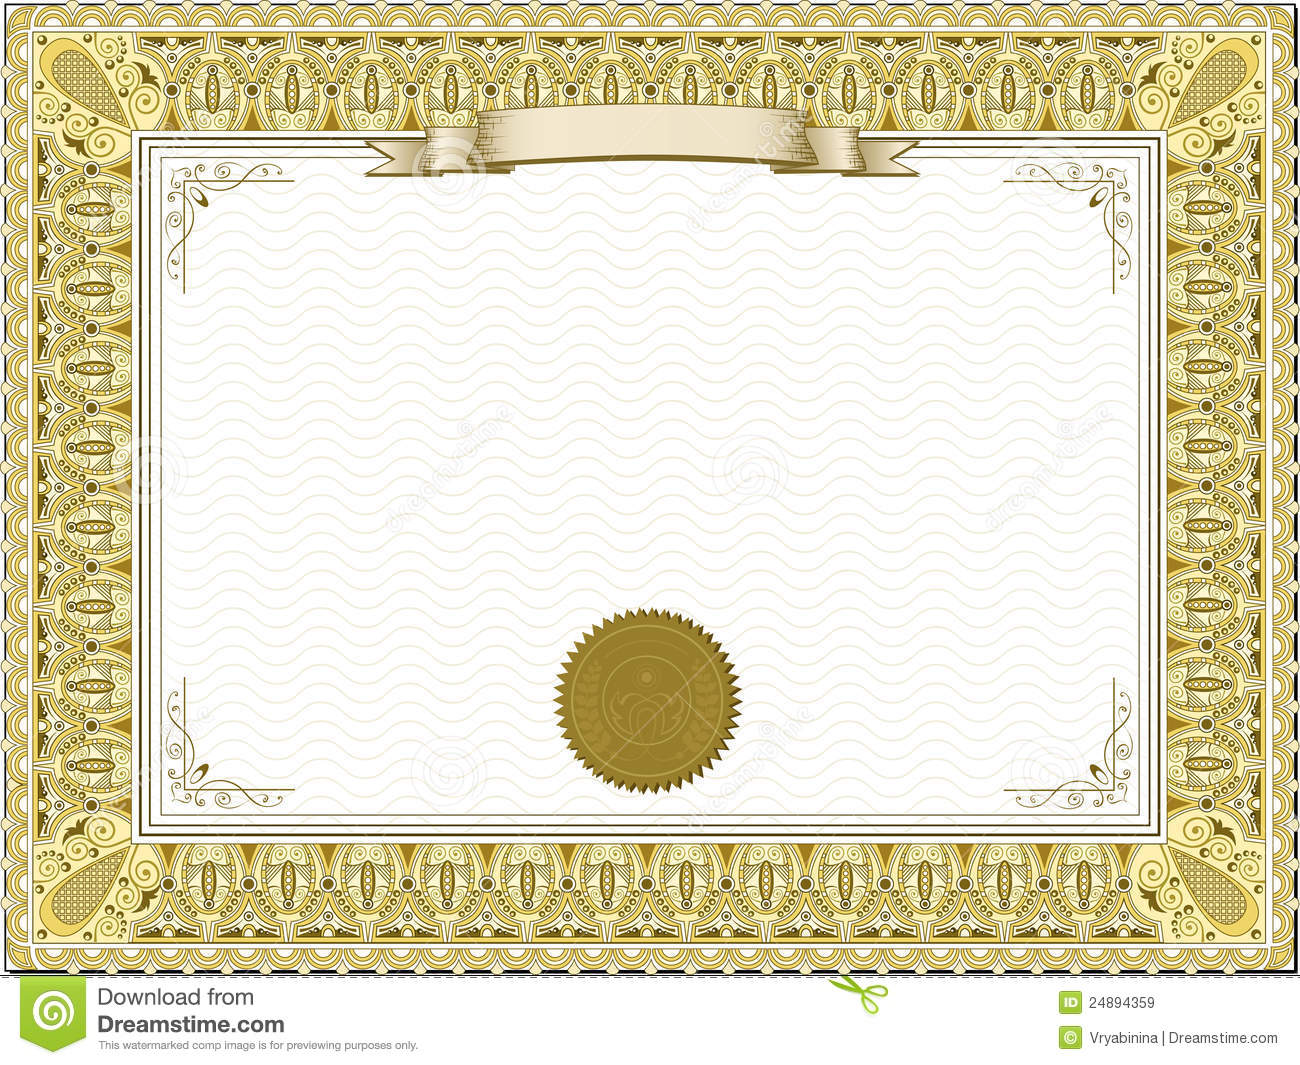 Gold Detailed Certificate Royalty Free Stock Images Image: 24894359